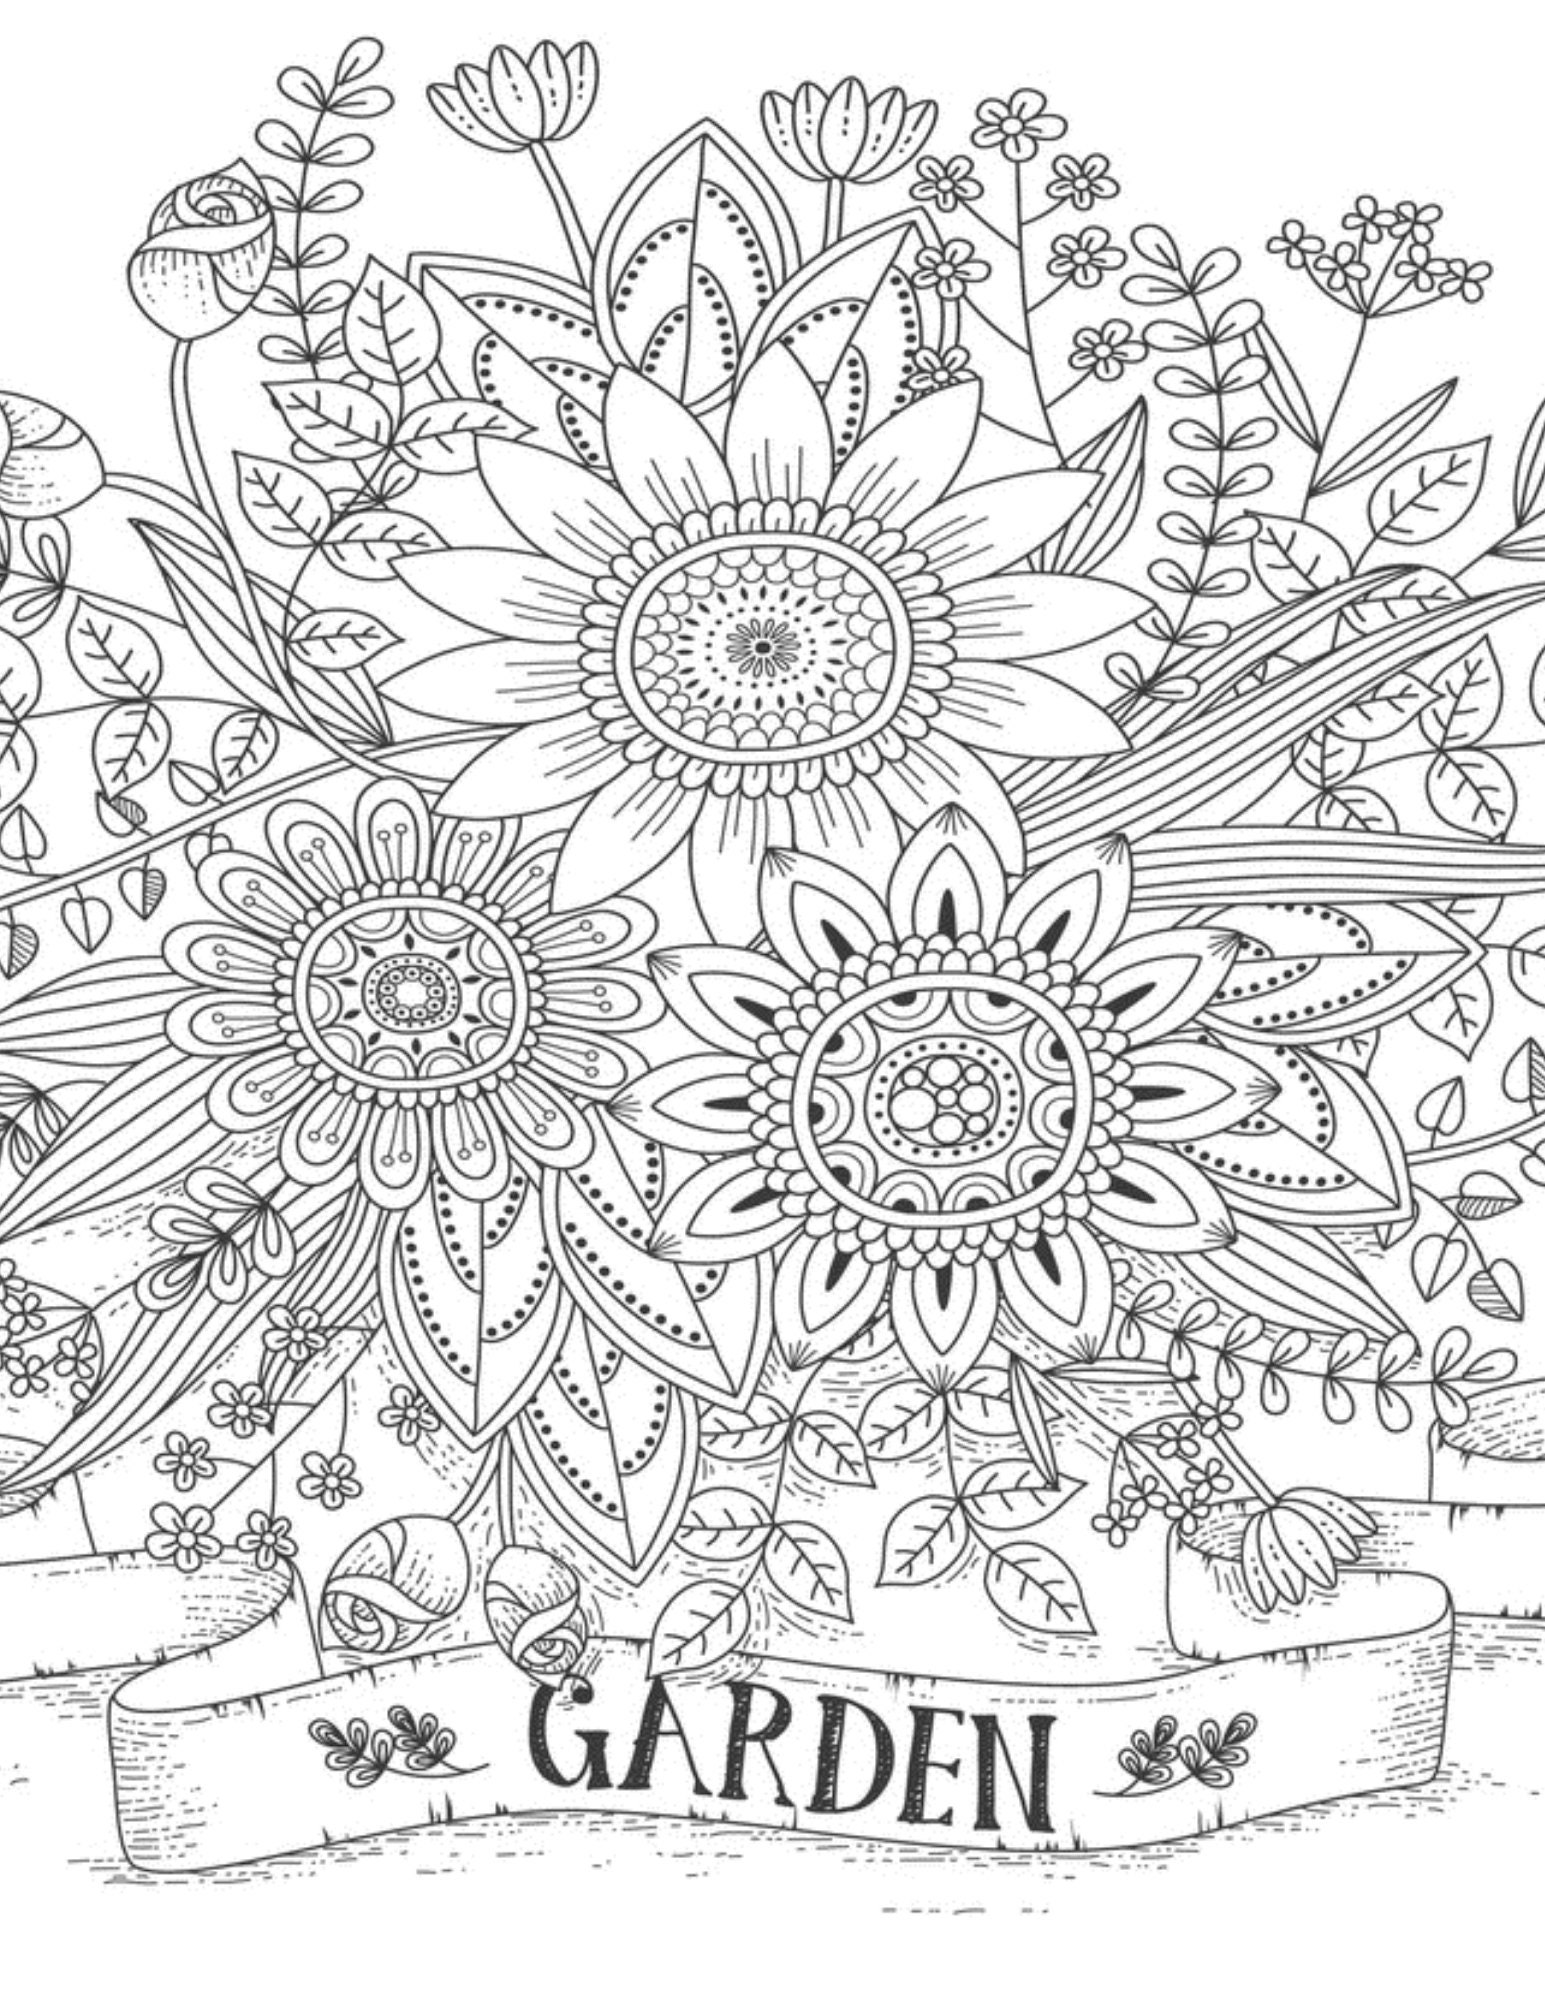  Coloring Books for Adults Relaxation: Adult Coloring Books:  Flowers, Animals and Garden Designs: 9781940282893: Coloring Books for  Adults Relaxation, Tip Top Coloring Books: Books